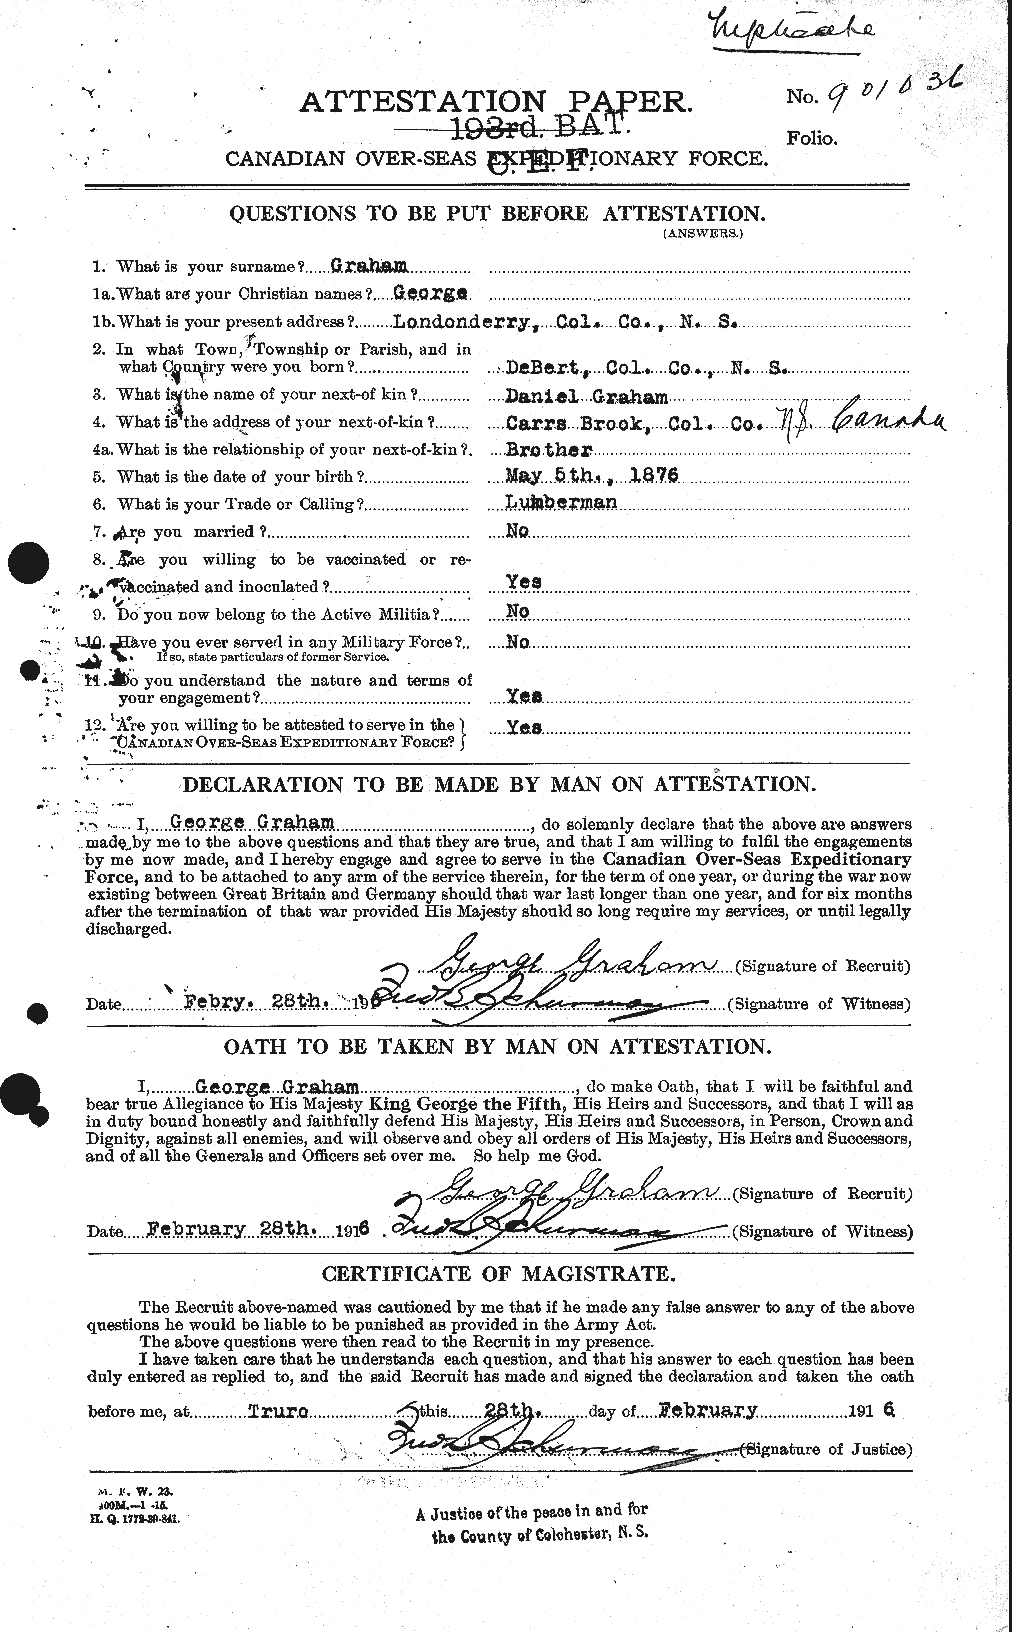 Personnel Records of the First World War - CEF 357630a